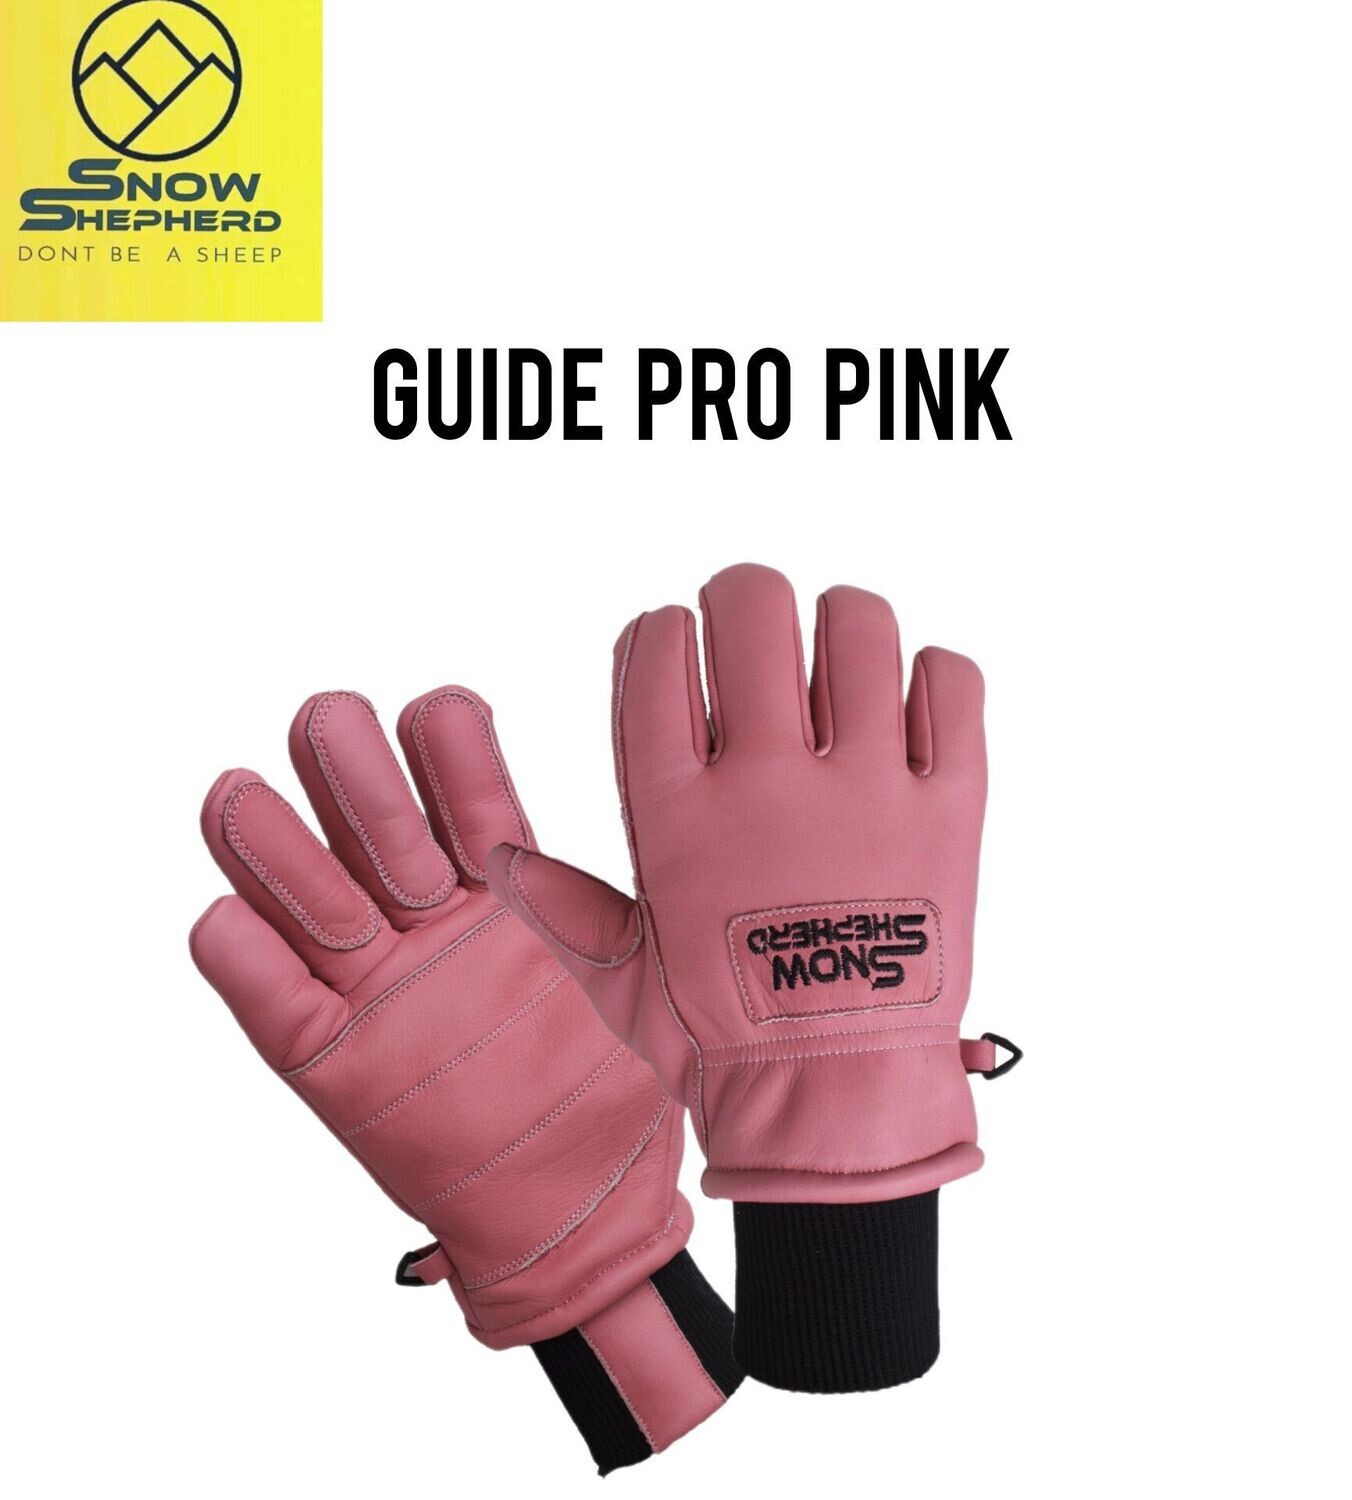 Guide Pro Glove Pink